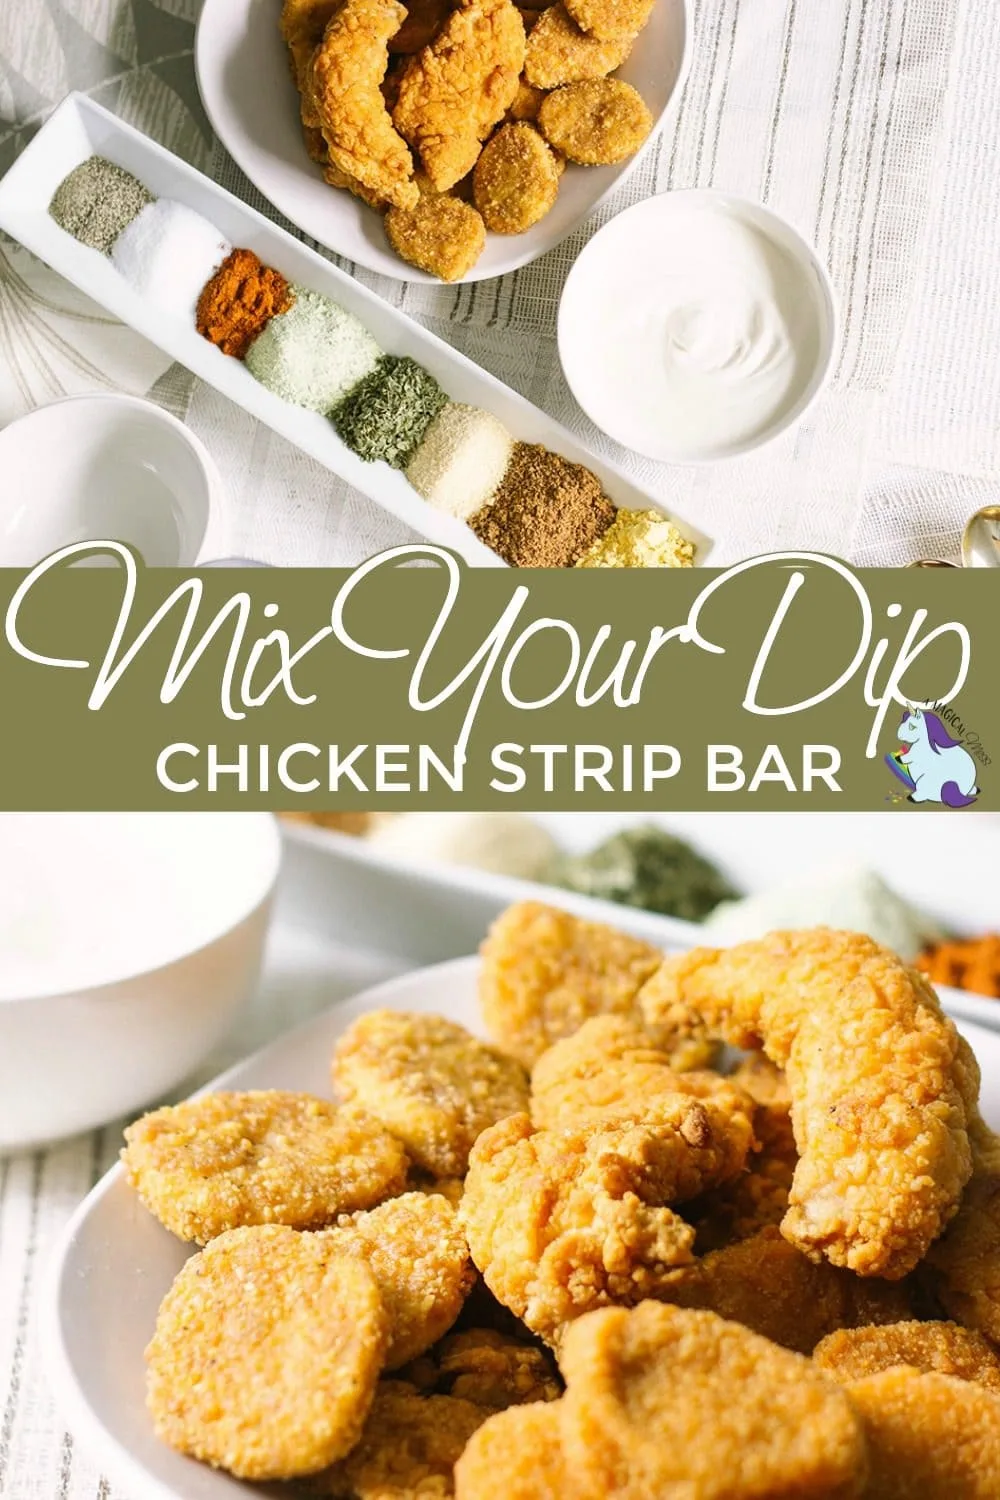 Chicken strips on a table with seasonings to mix dips.